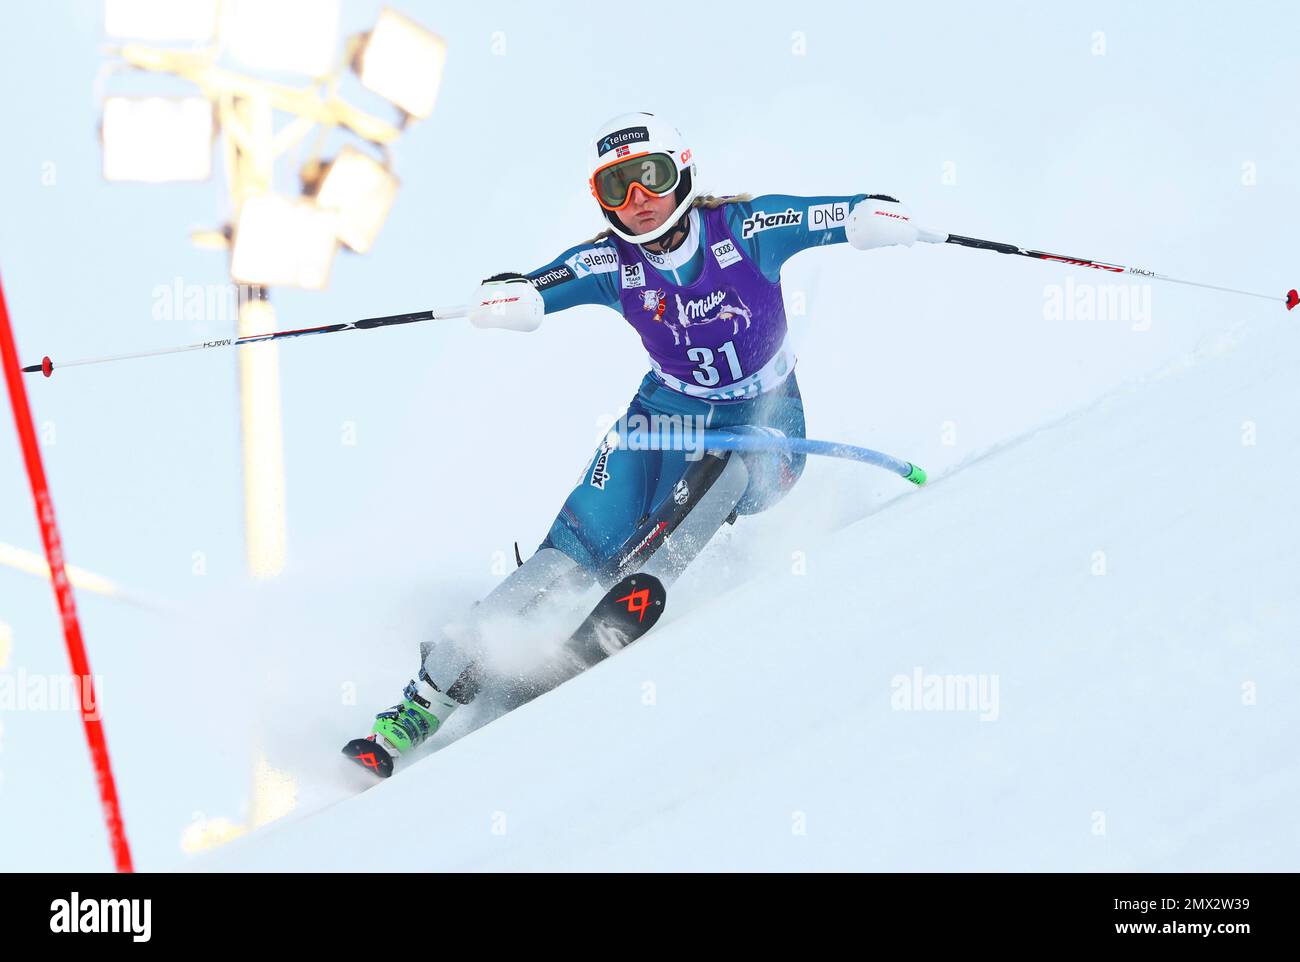 Maren Skjoeld of Norway competes during the first run of an alpine skiing  women's World Cup slalom, in Levi, Finland, Saturday Nov. 12, 2016. (AP  Photo/Alessandro Trovati Stock Photo - Alamy